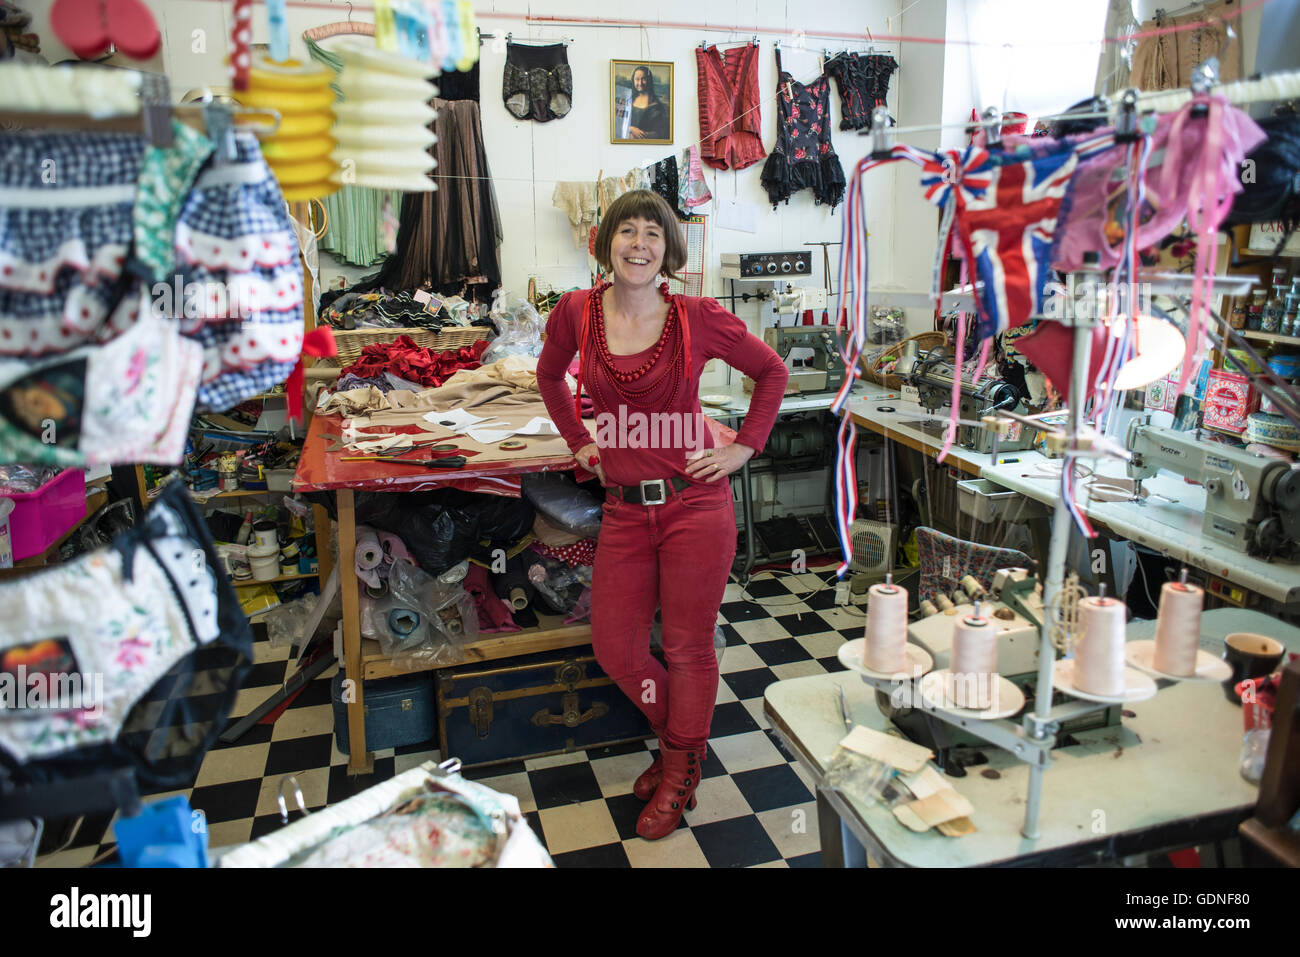 A woman in red blouse, trousers, and necklaces smiling and standing in the middle of a tailoring shop. Stock Photo